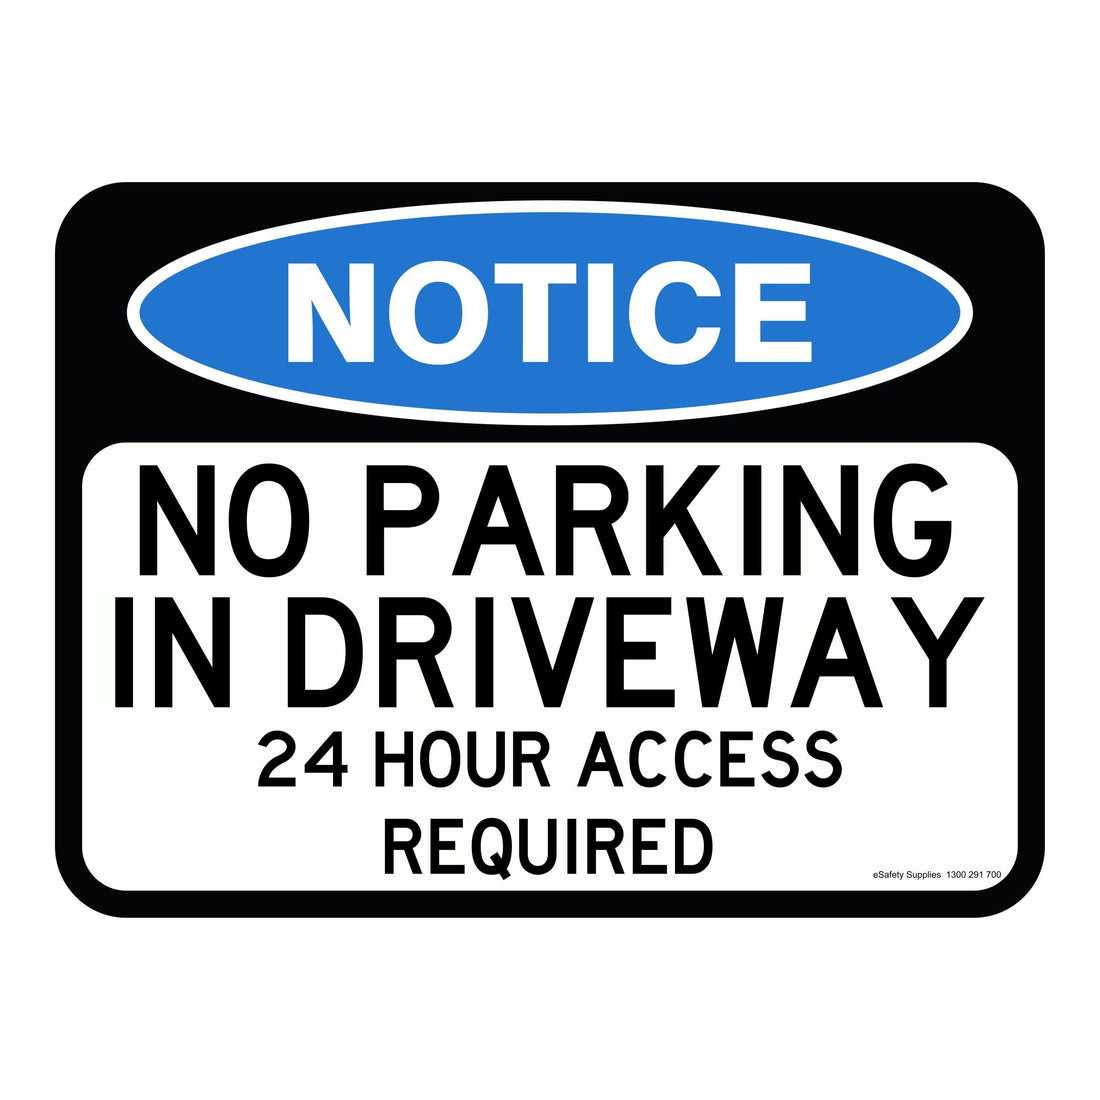 NOTICE - NO PARKING IN DRIVEWAY 24 HOUR ACCESS REQUIRED